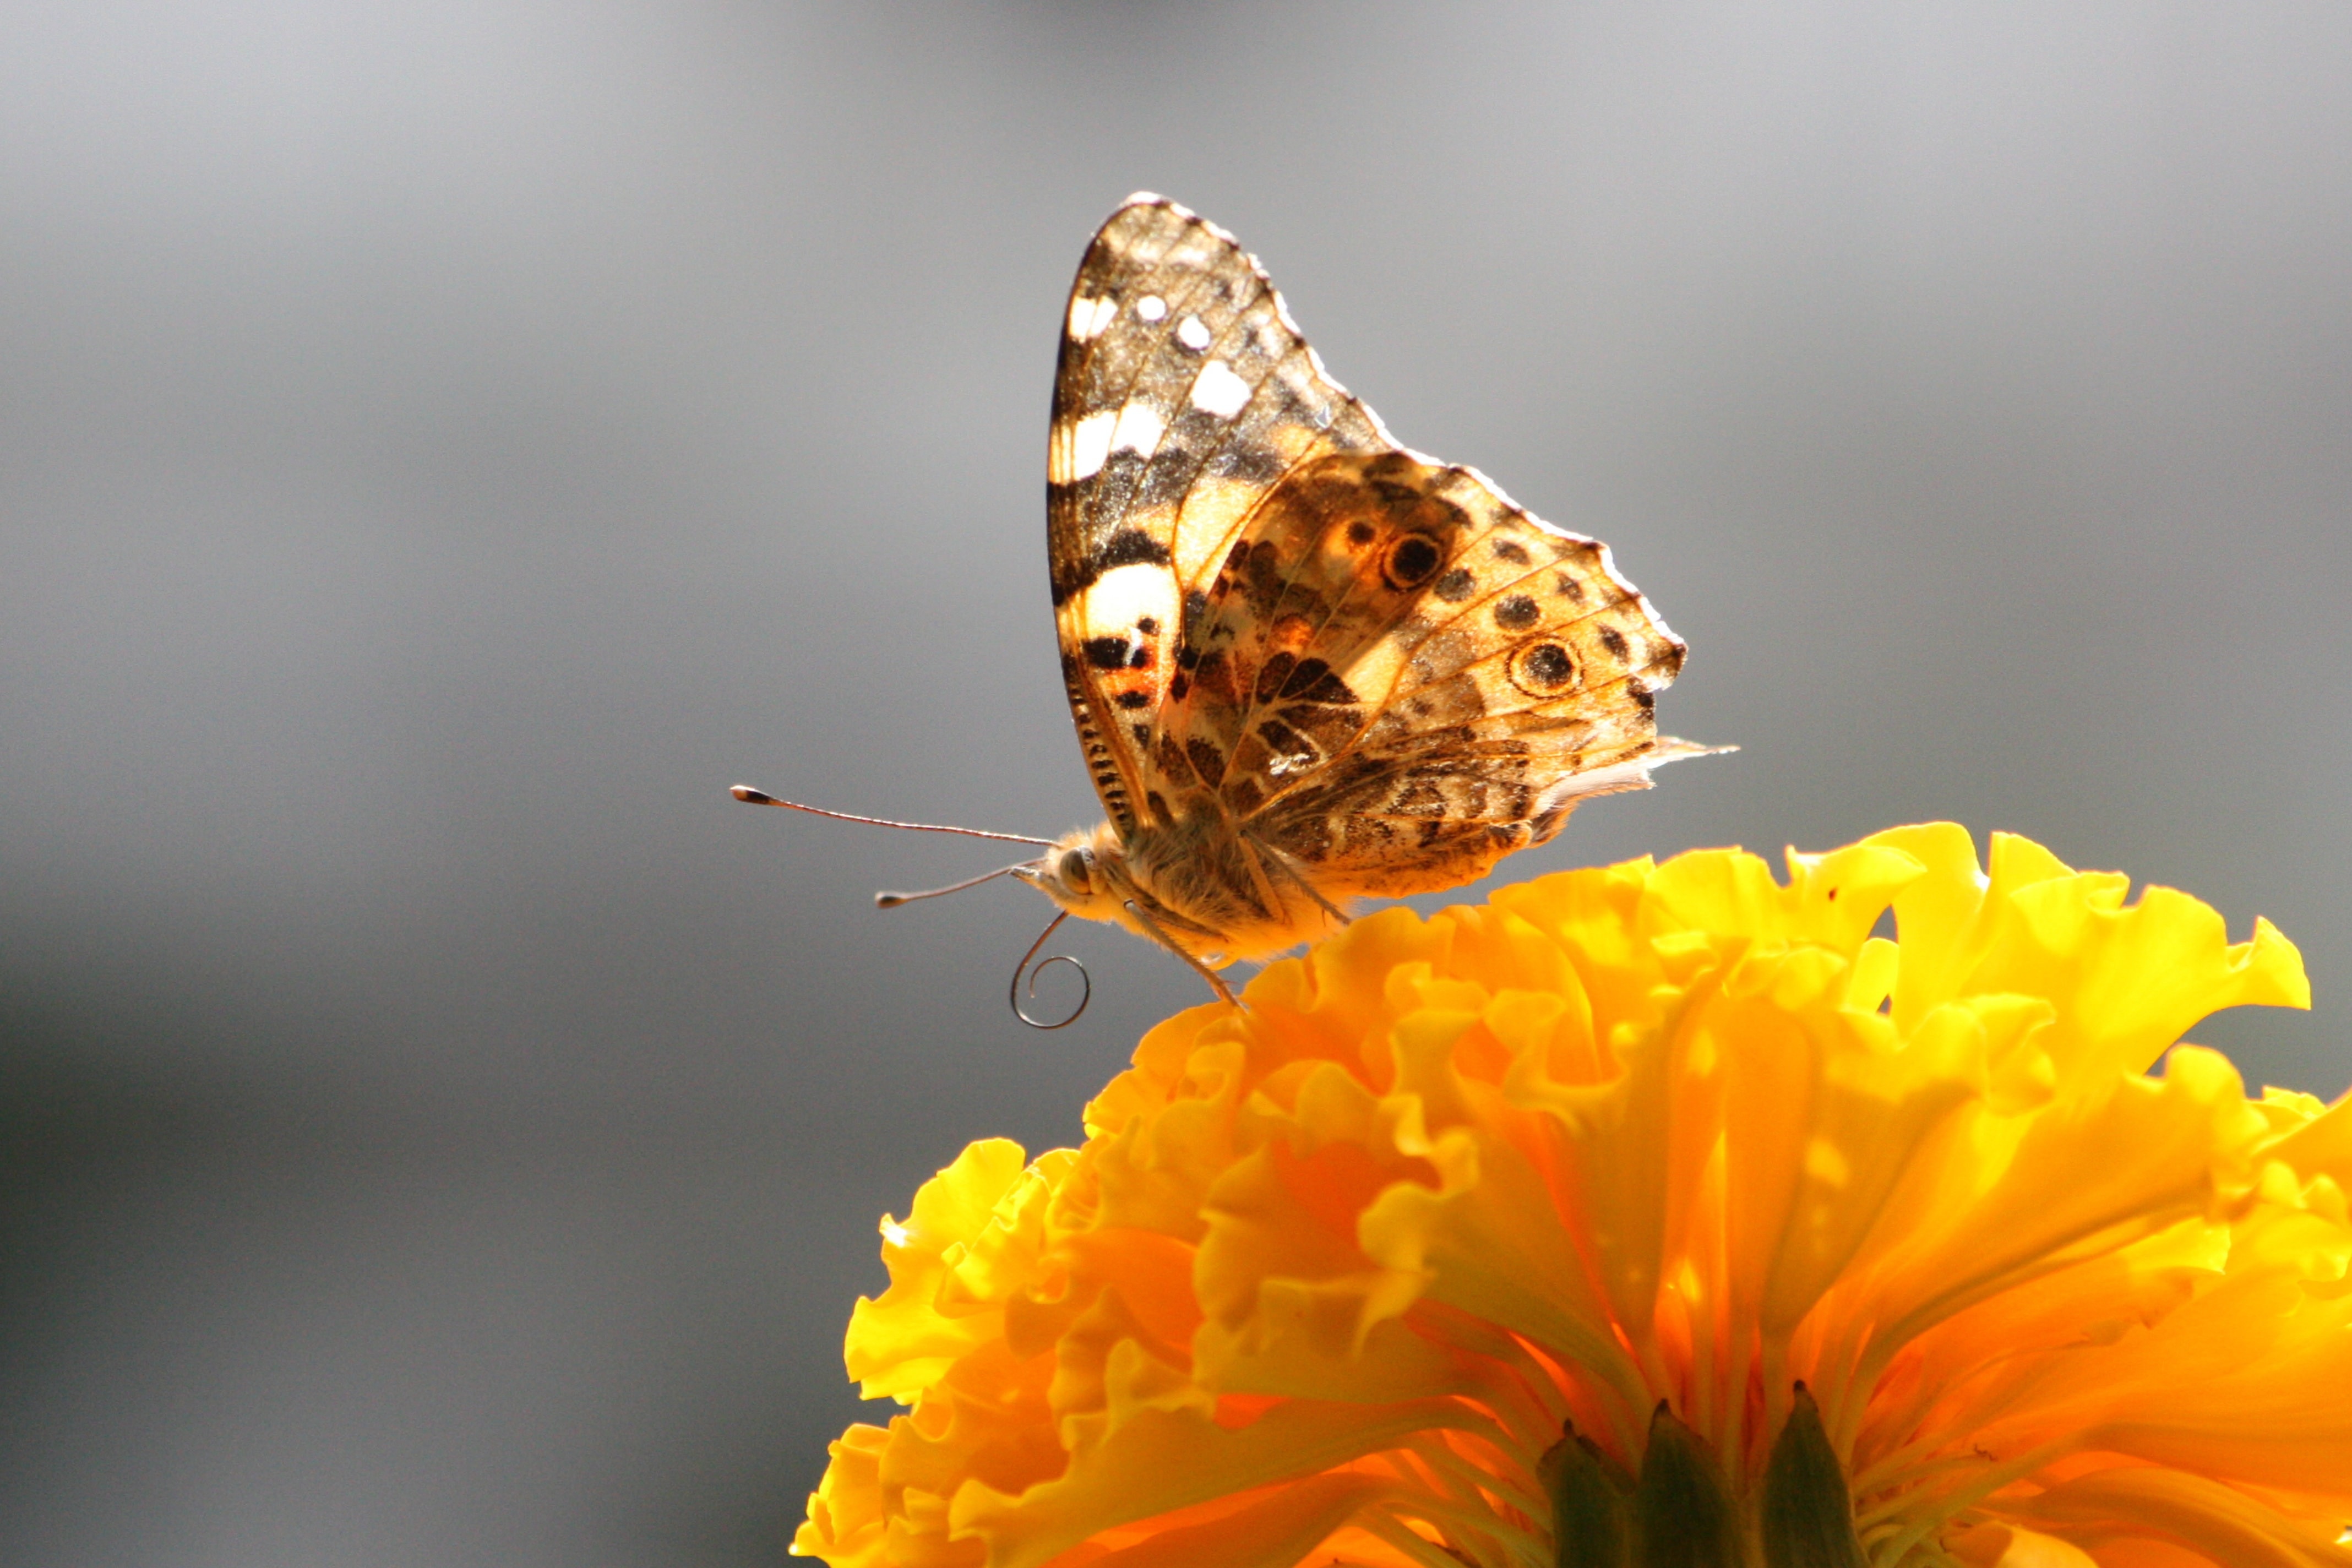 beige brown and gray butterfly and yellow petal flower